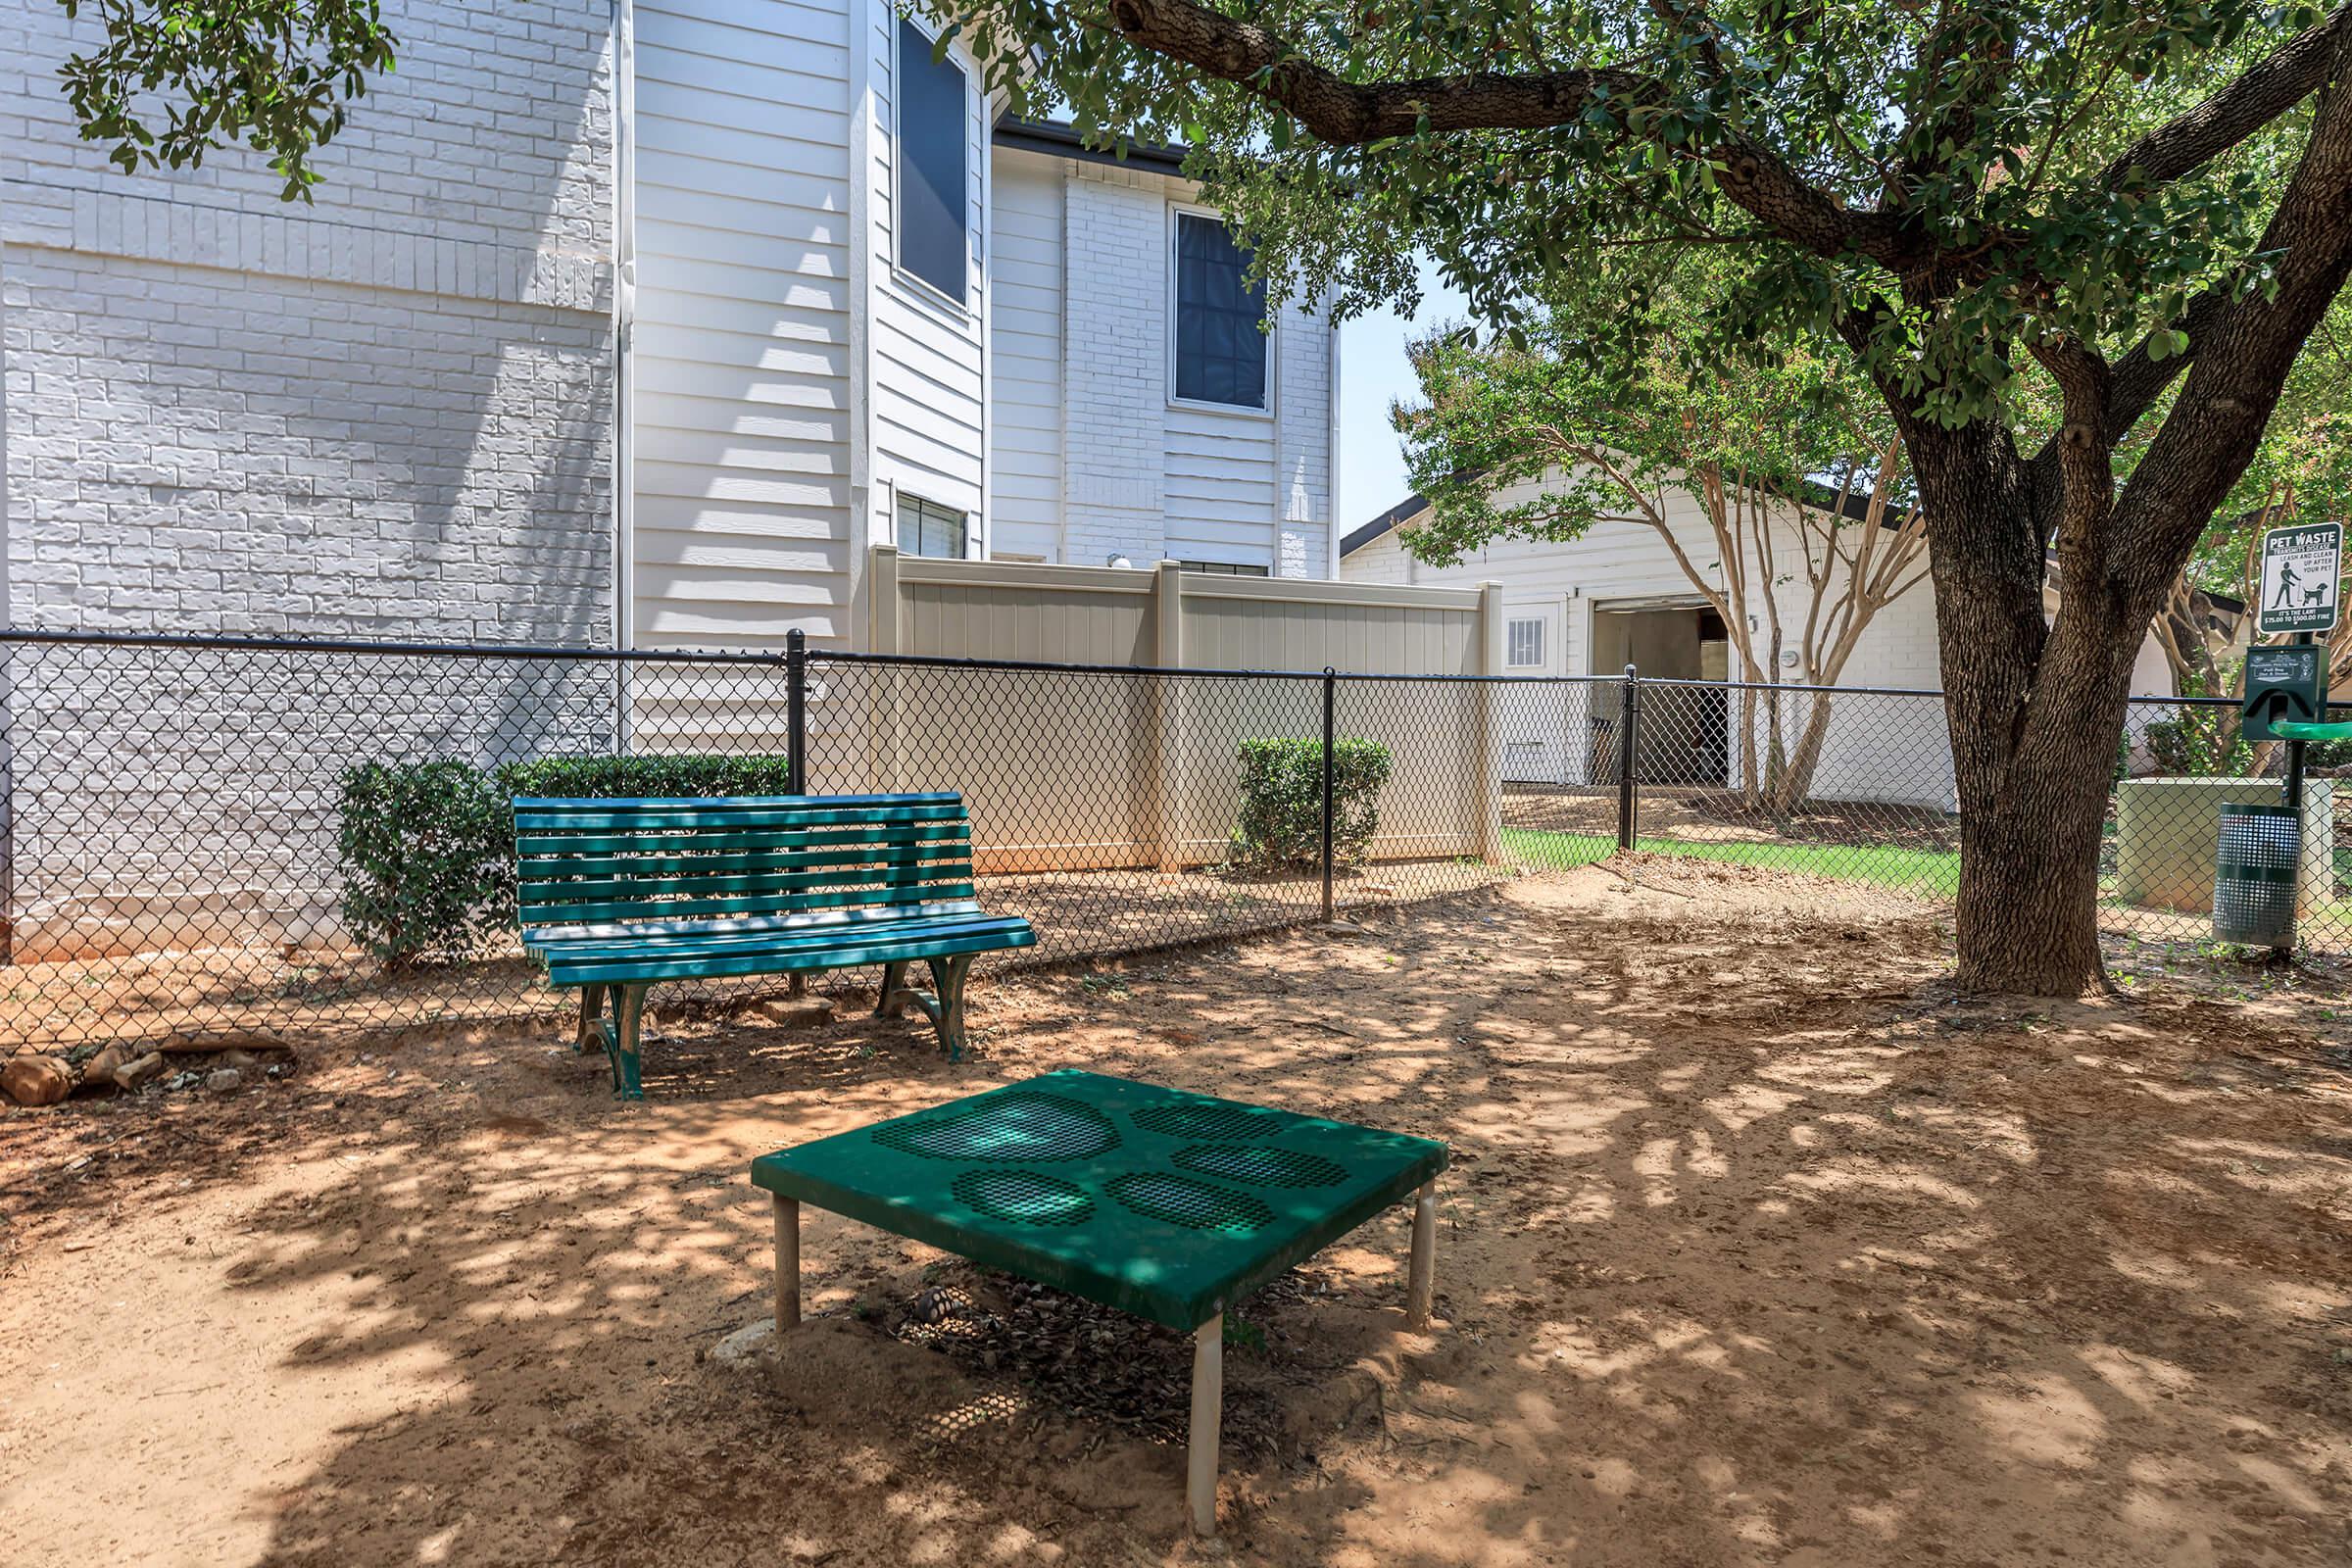 Tides on Randol East Apartments pet park with a bench